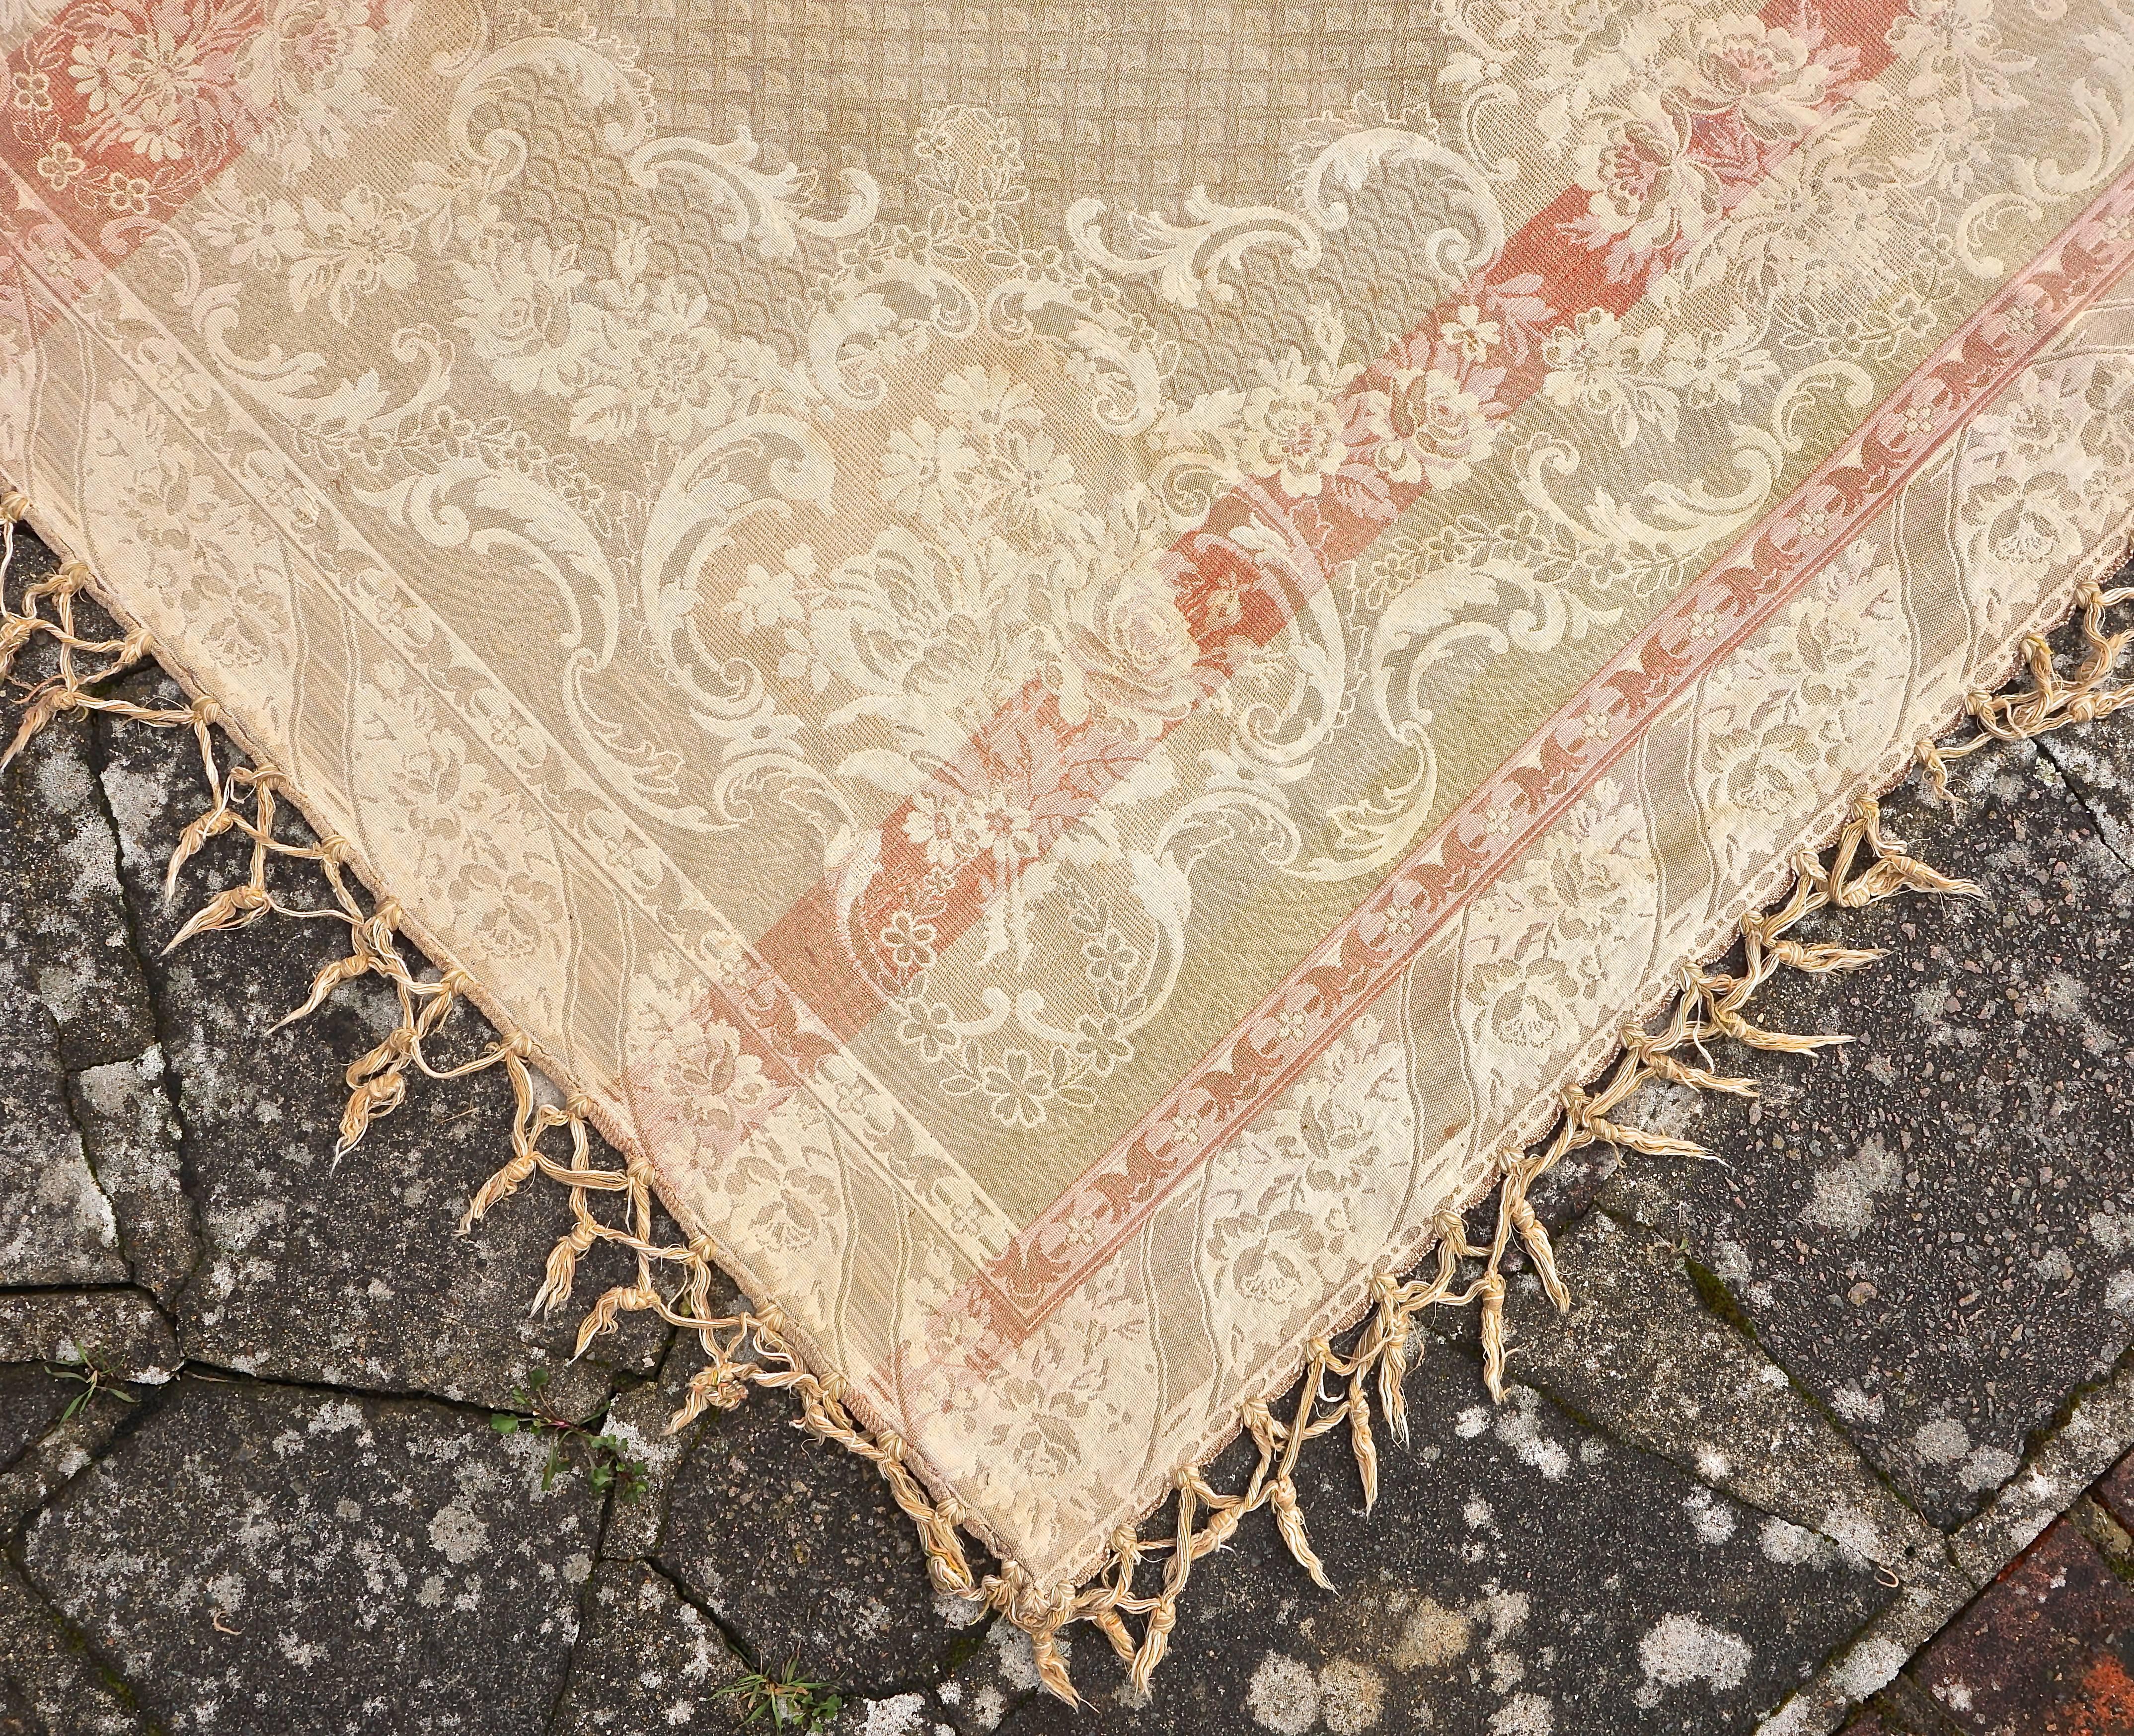 Antique French Woven Tapestry Floral Fringed Cotton Rug Throw in Pastel Shades 1